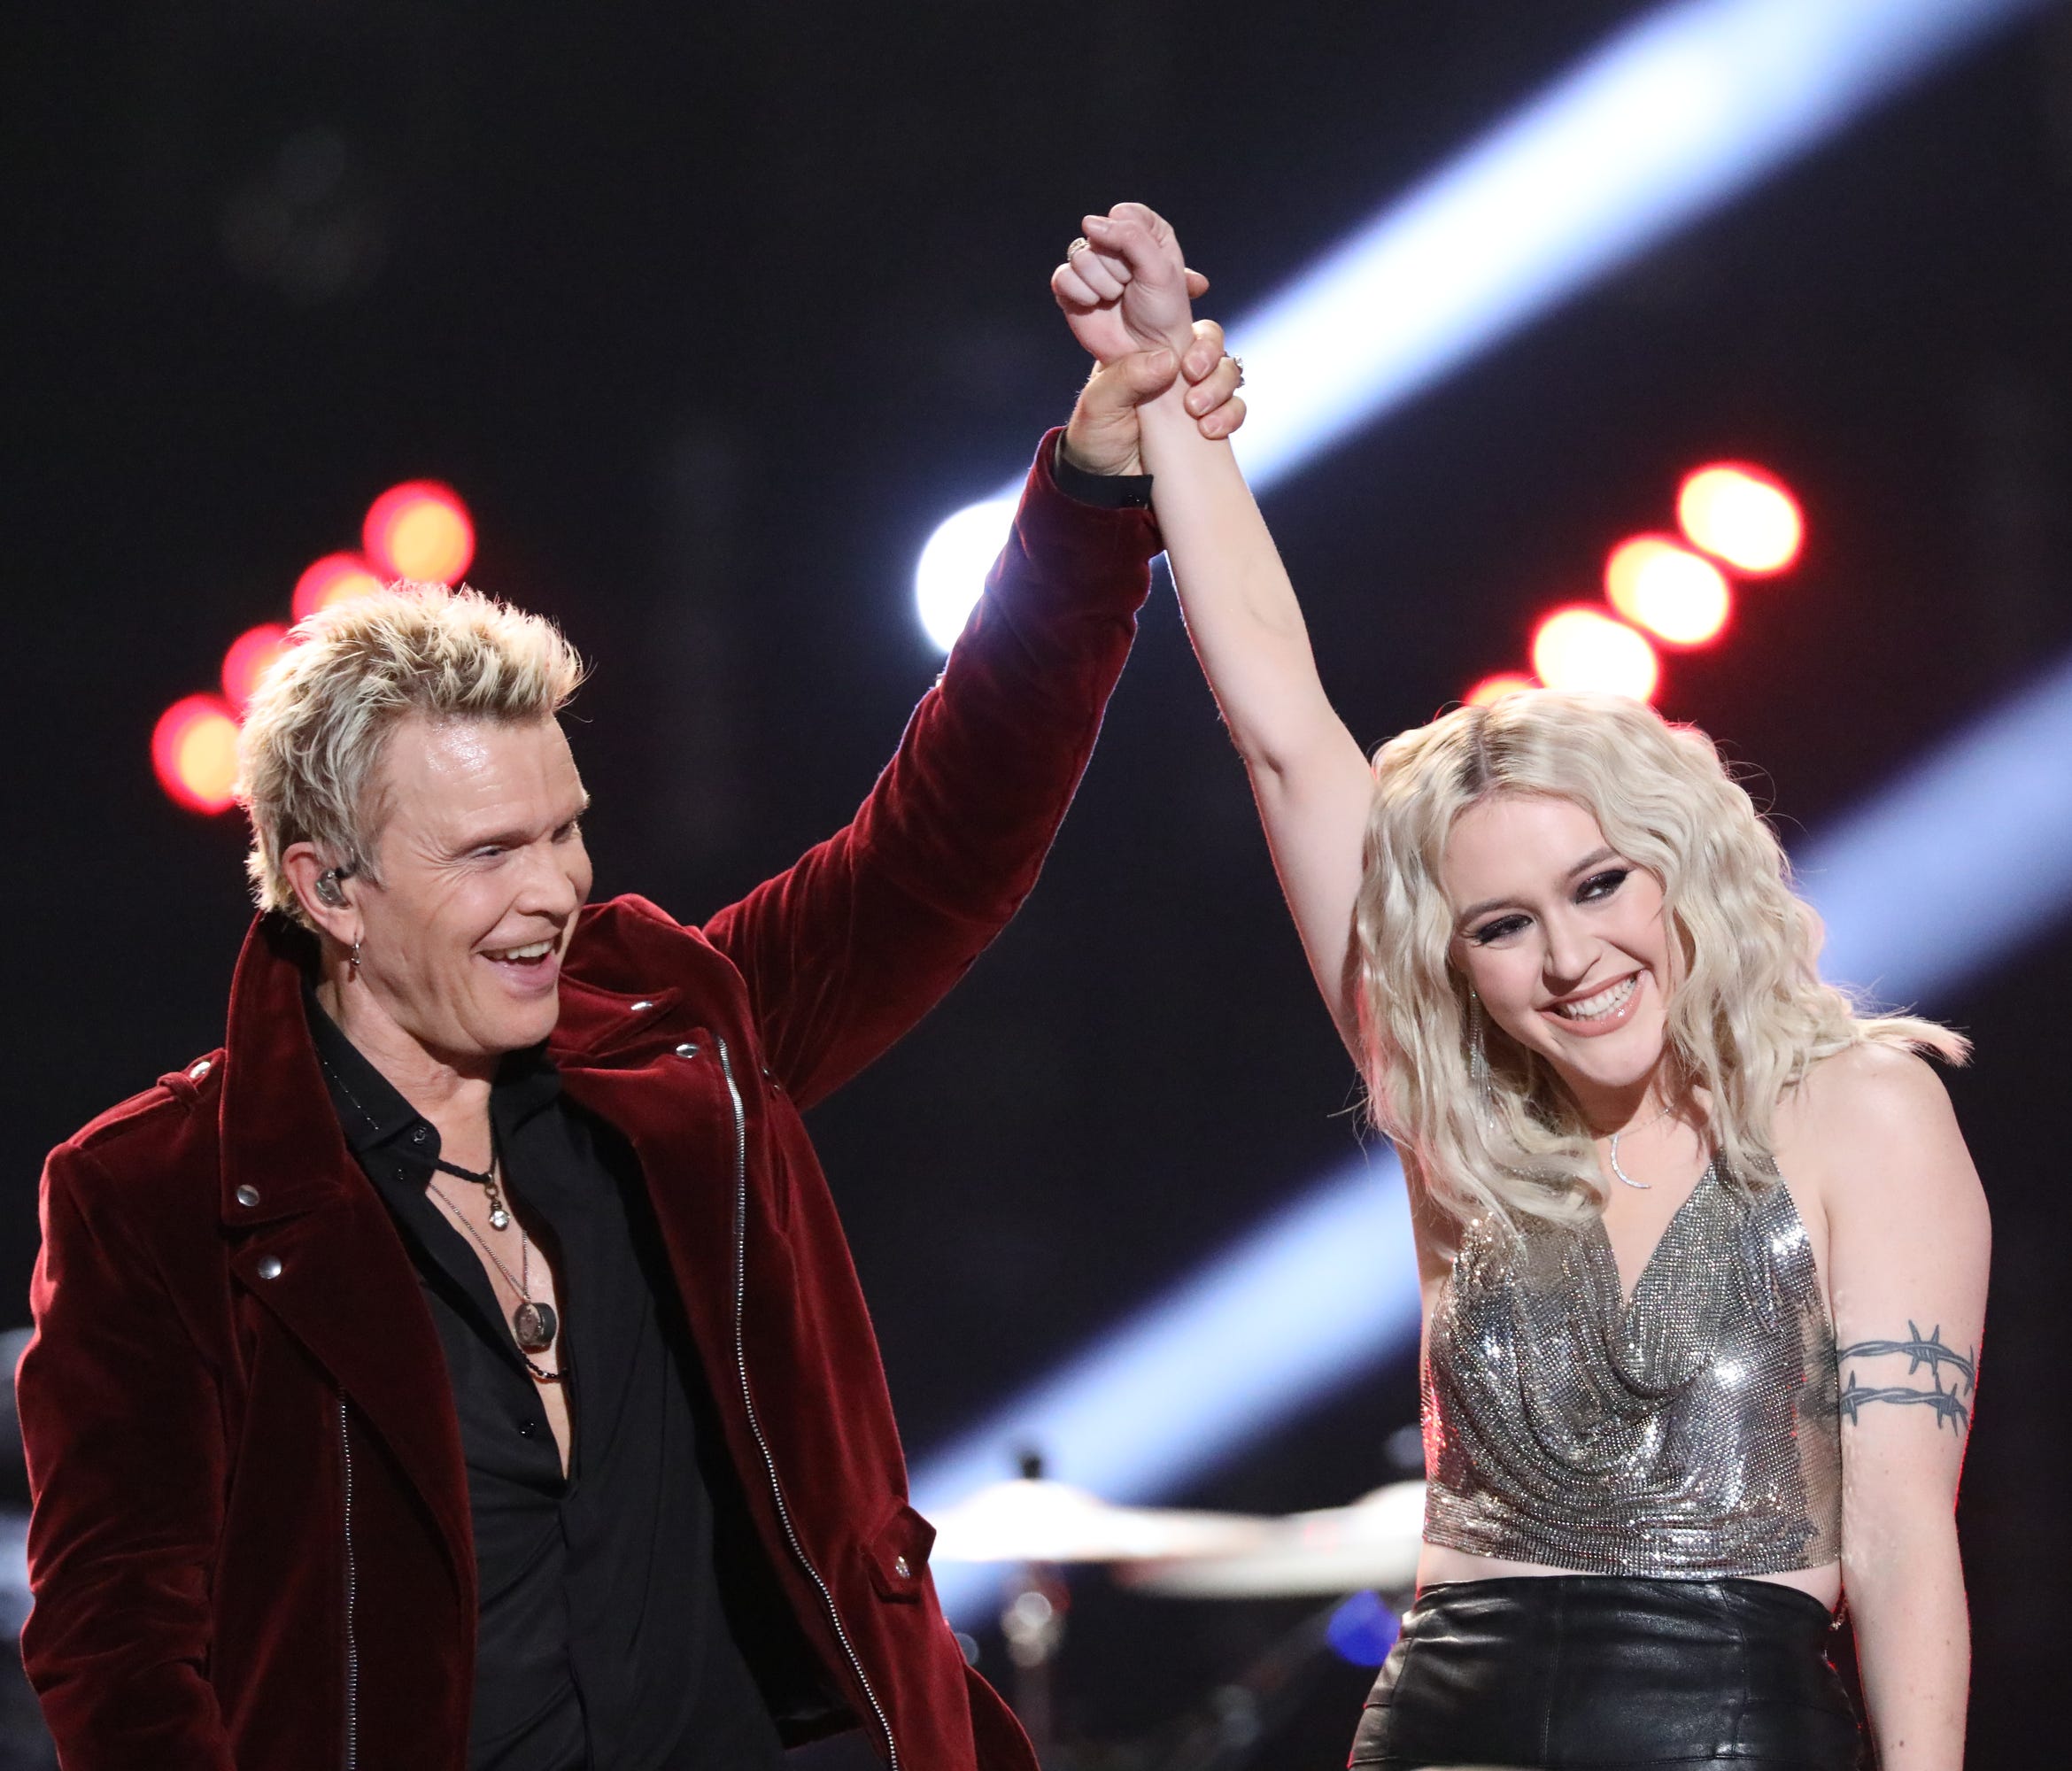 Chloe Kohanski, pictured with Billy Idol, was crowned the winner of Season 13 of 'The Voice' on Tuesday.